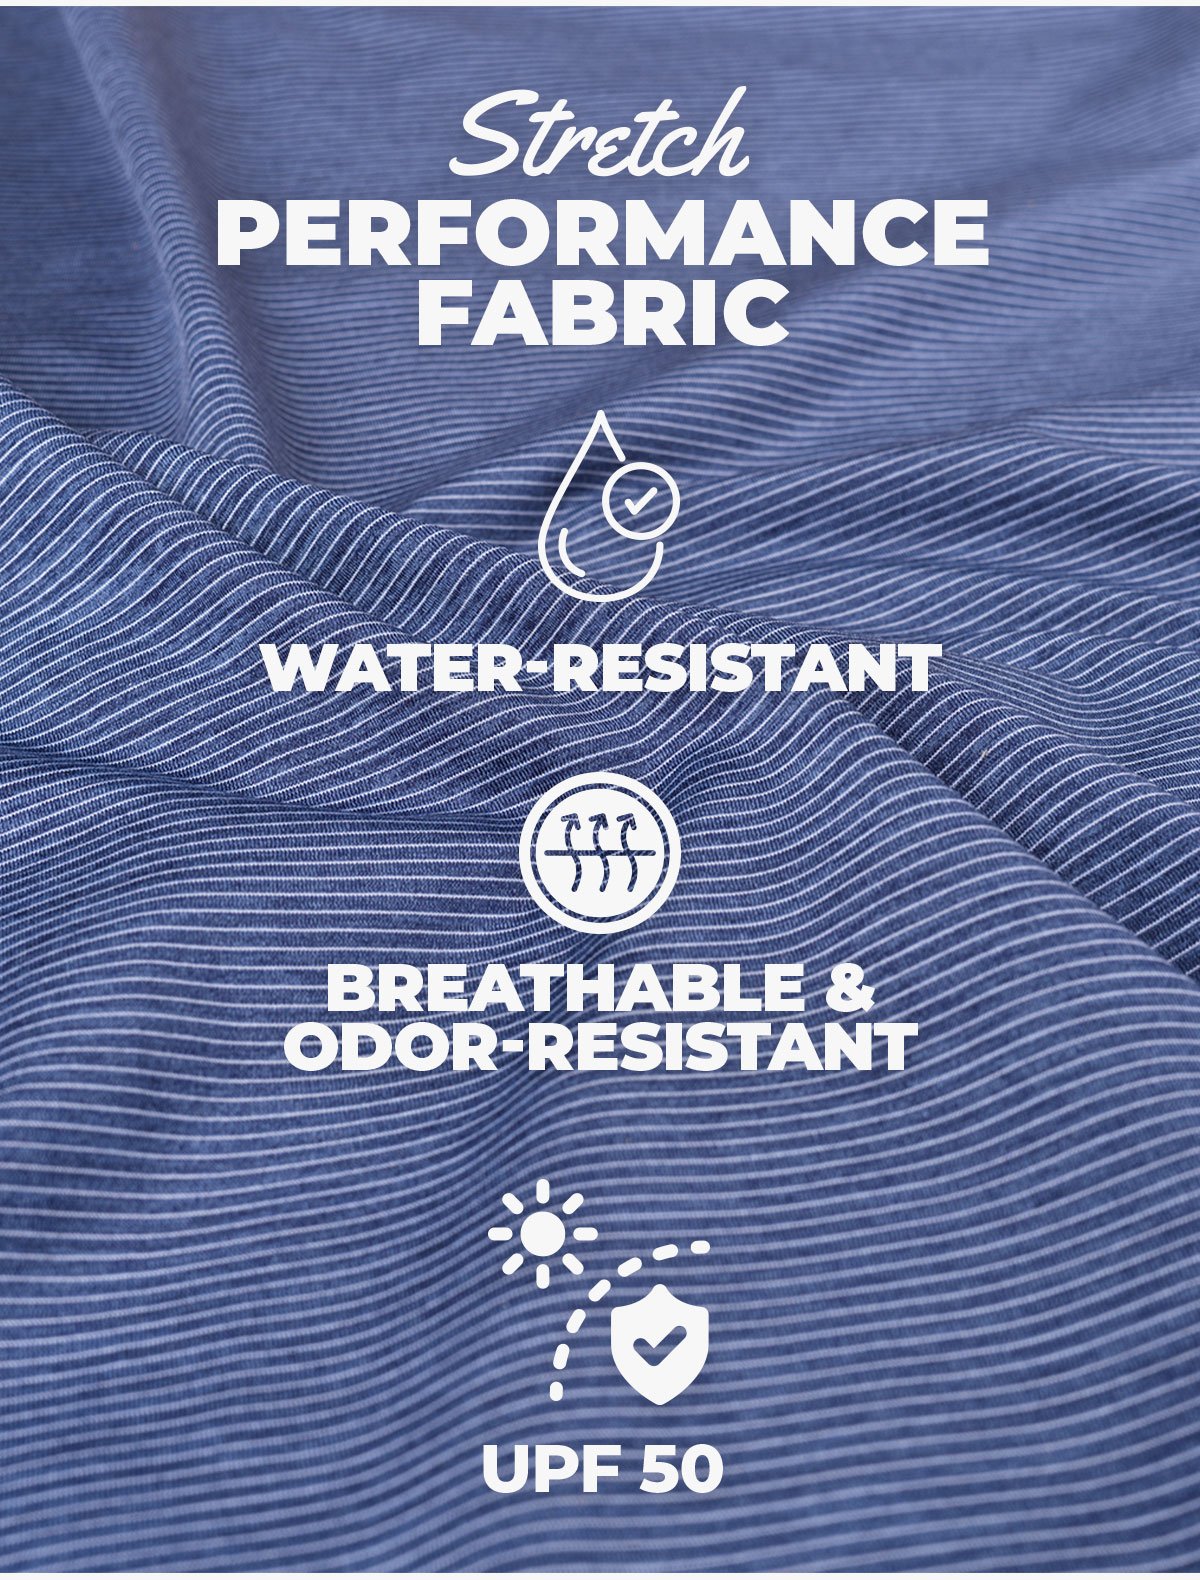 Stretchperformance fabric. Water-resistant. Breathable & odor-resistant. UPF 50